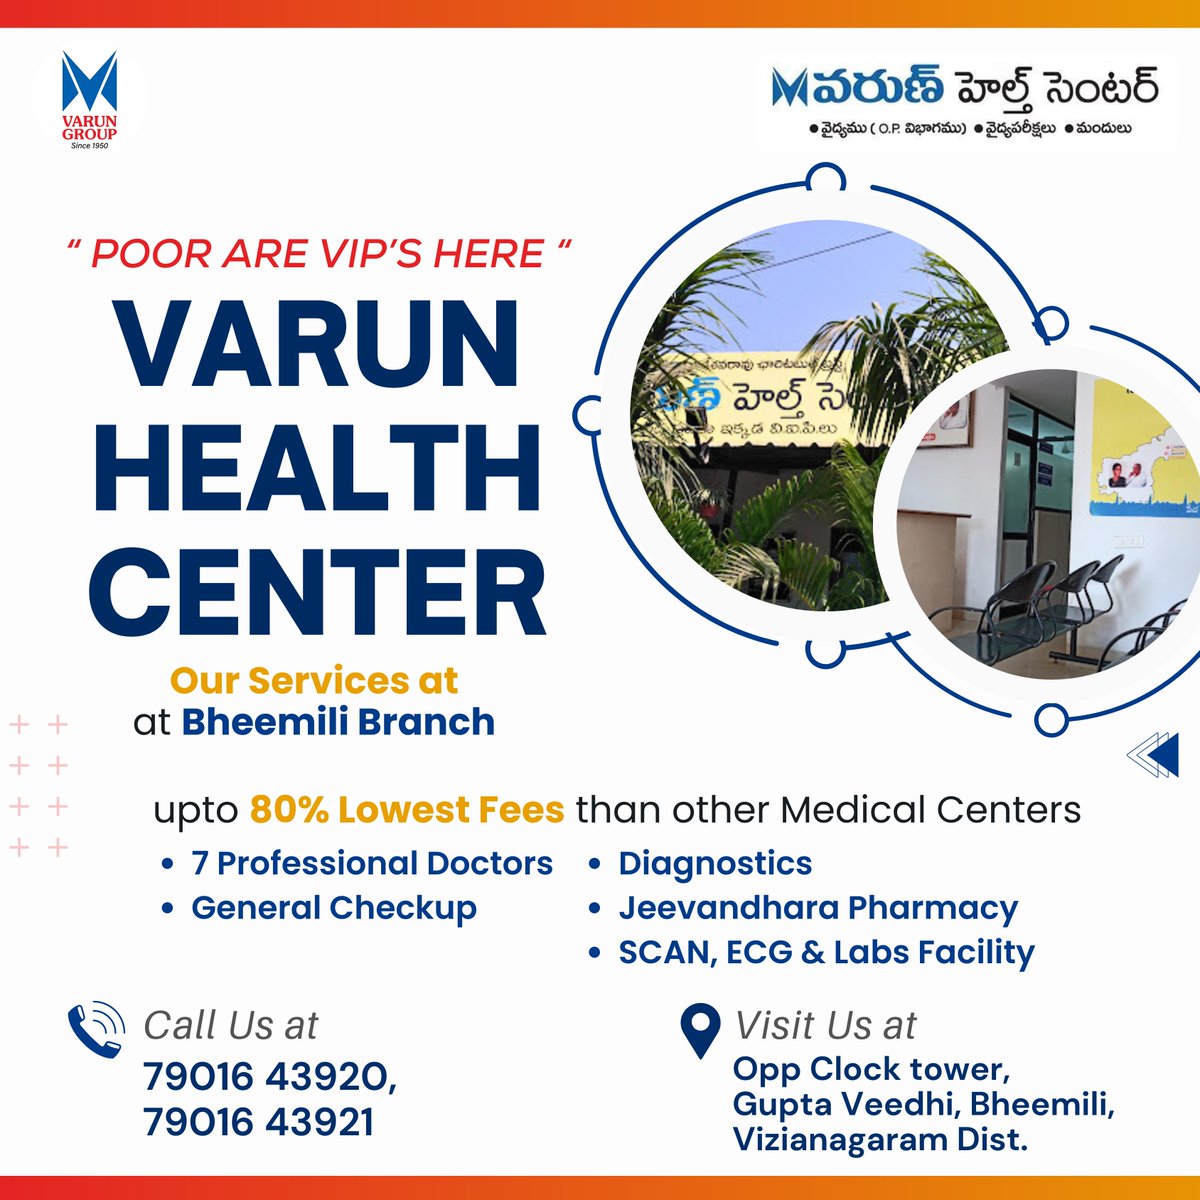 🌟 Welcome to Varun Health Center Bheemili Branch!  #VarunHealthCenter #BheemiliBranch #HealthcareExcellence #AffordableHealthcare #BheemiliHealthcare #CommunityWellbeing #MedicalServices #HealthScreening #PharmacyServices #DiagnosticCenter #HealthcareAccess #HealthyLiving